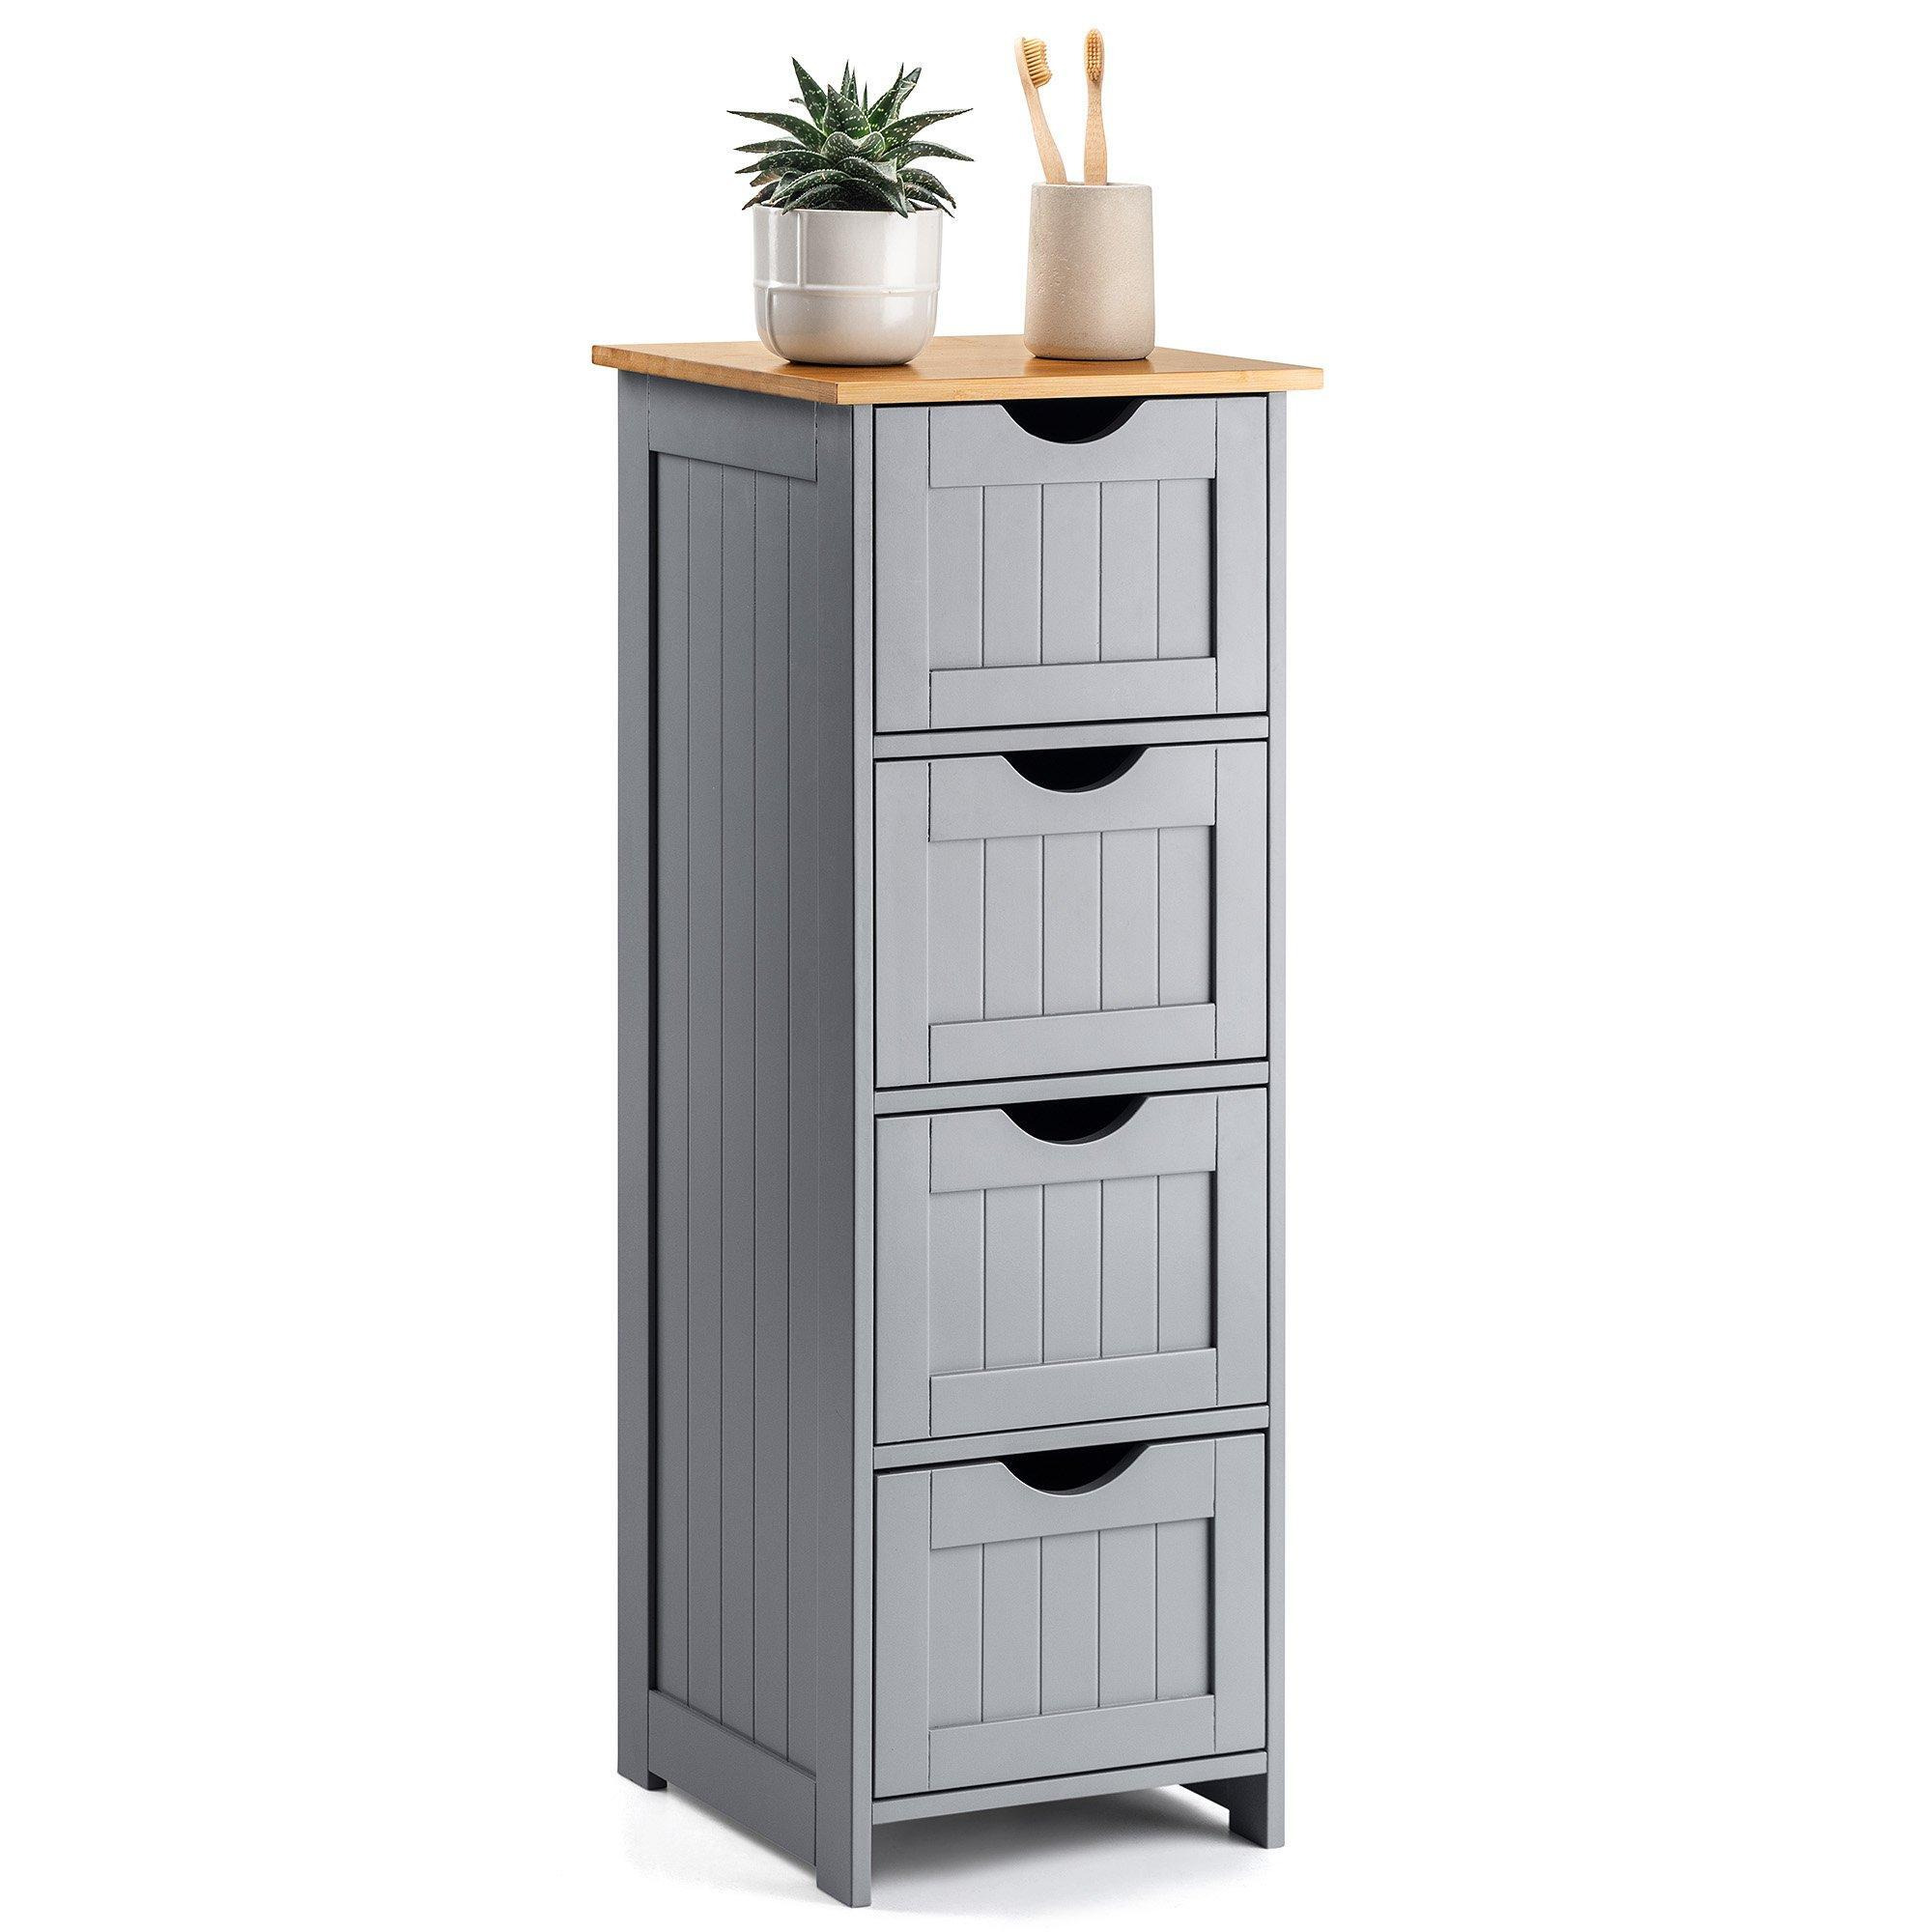 Christow Grey Bathroom Drawer Unit Floor Storage Cabinet With Bamboo Top 82cm - image 1